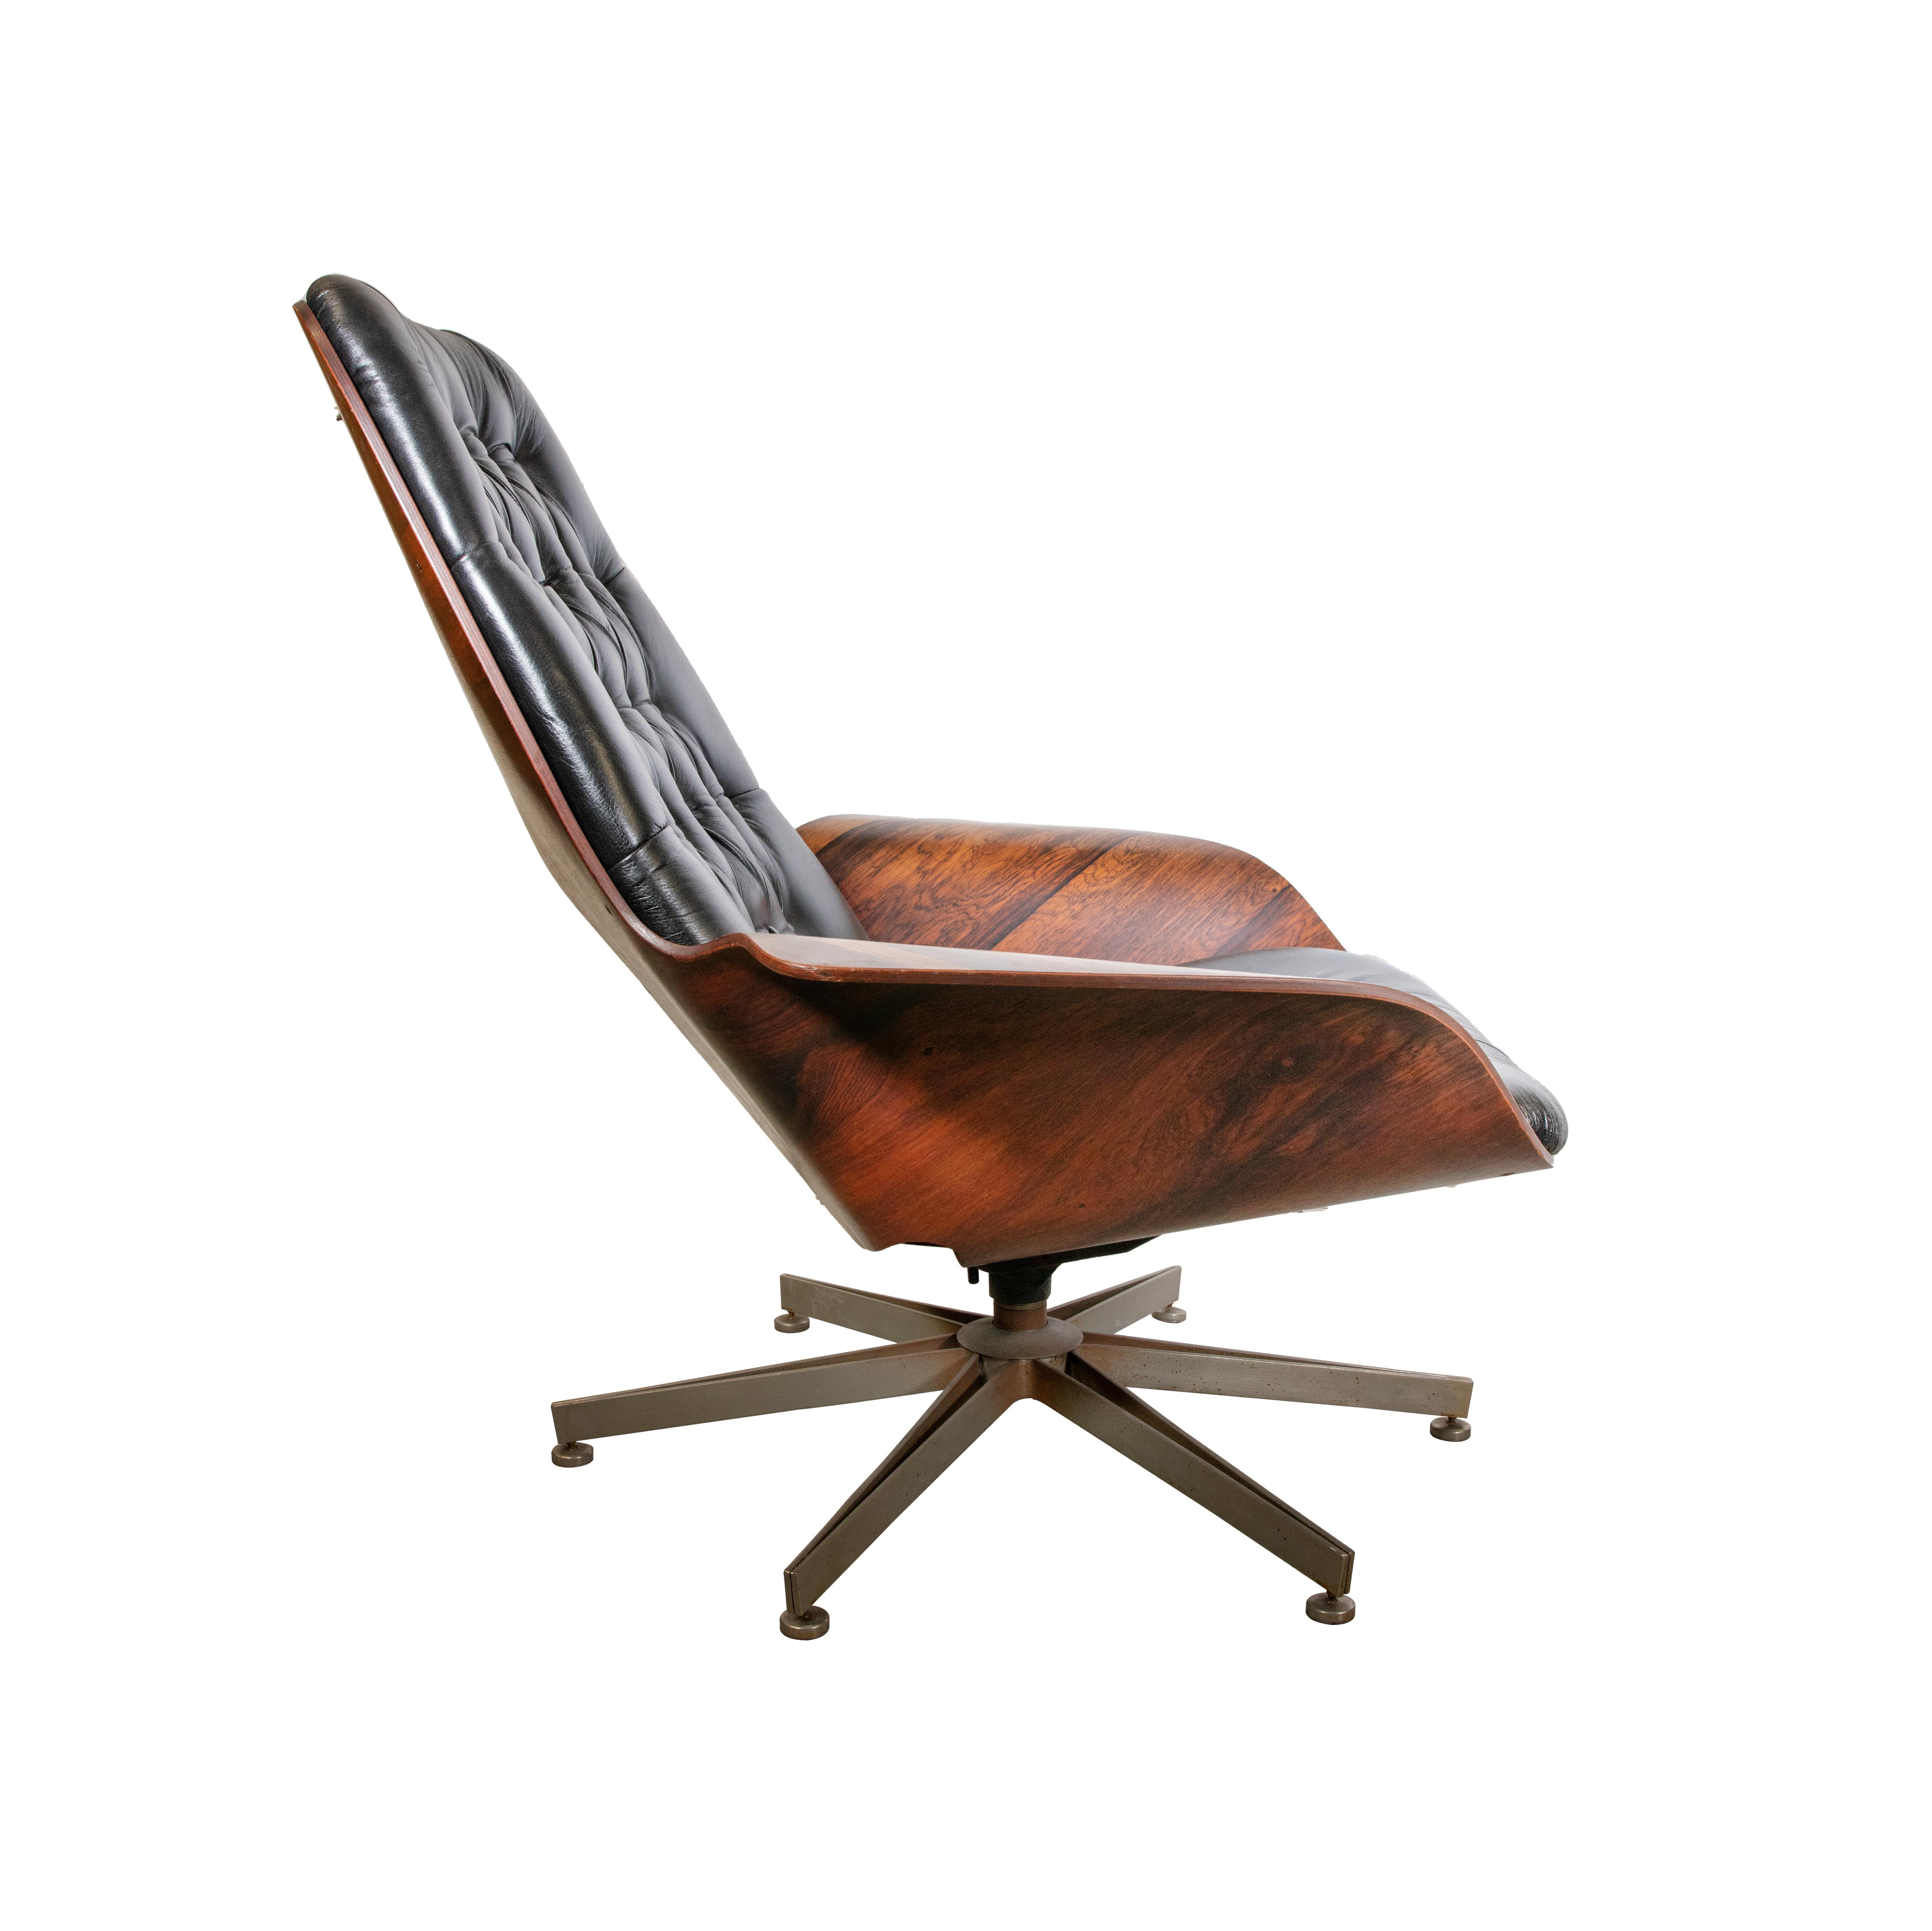 Vintage Adjustable Armchair is an original design furniture realized in the 1960s.

Steel, varnished metal, curved plywood veneered in rosewood, leather.

Excellent conditions, reupholstered leather. Reclining mechanism.

Production: Plycraft